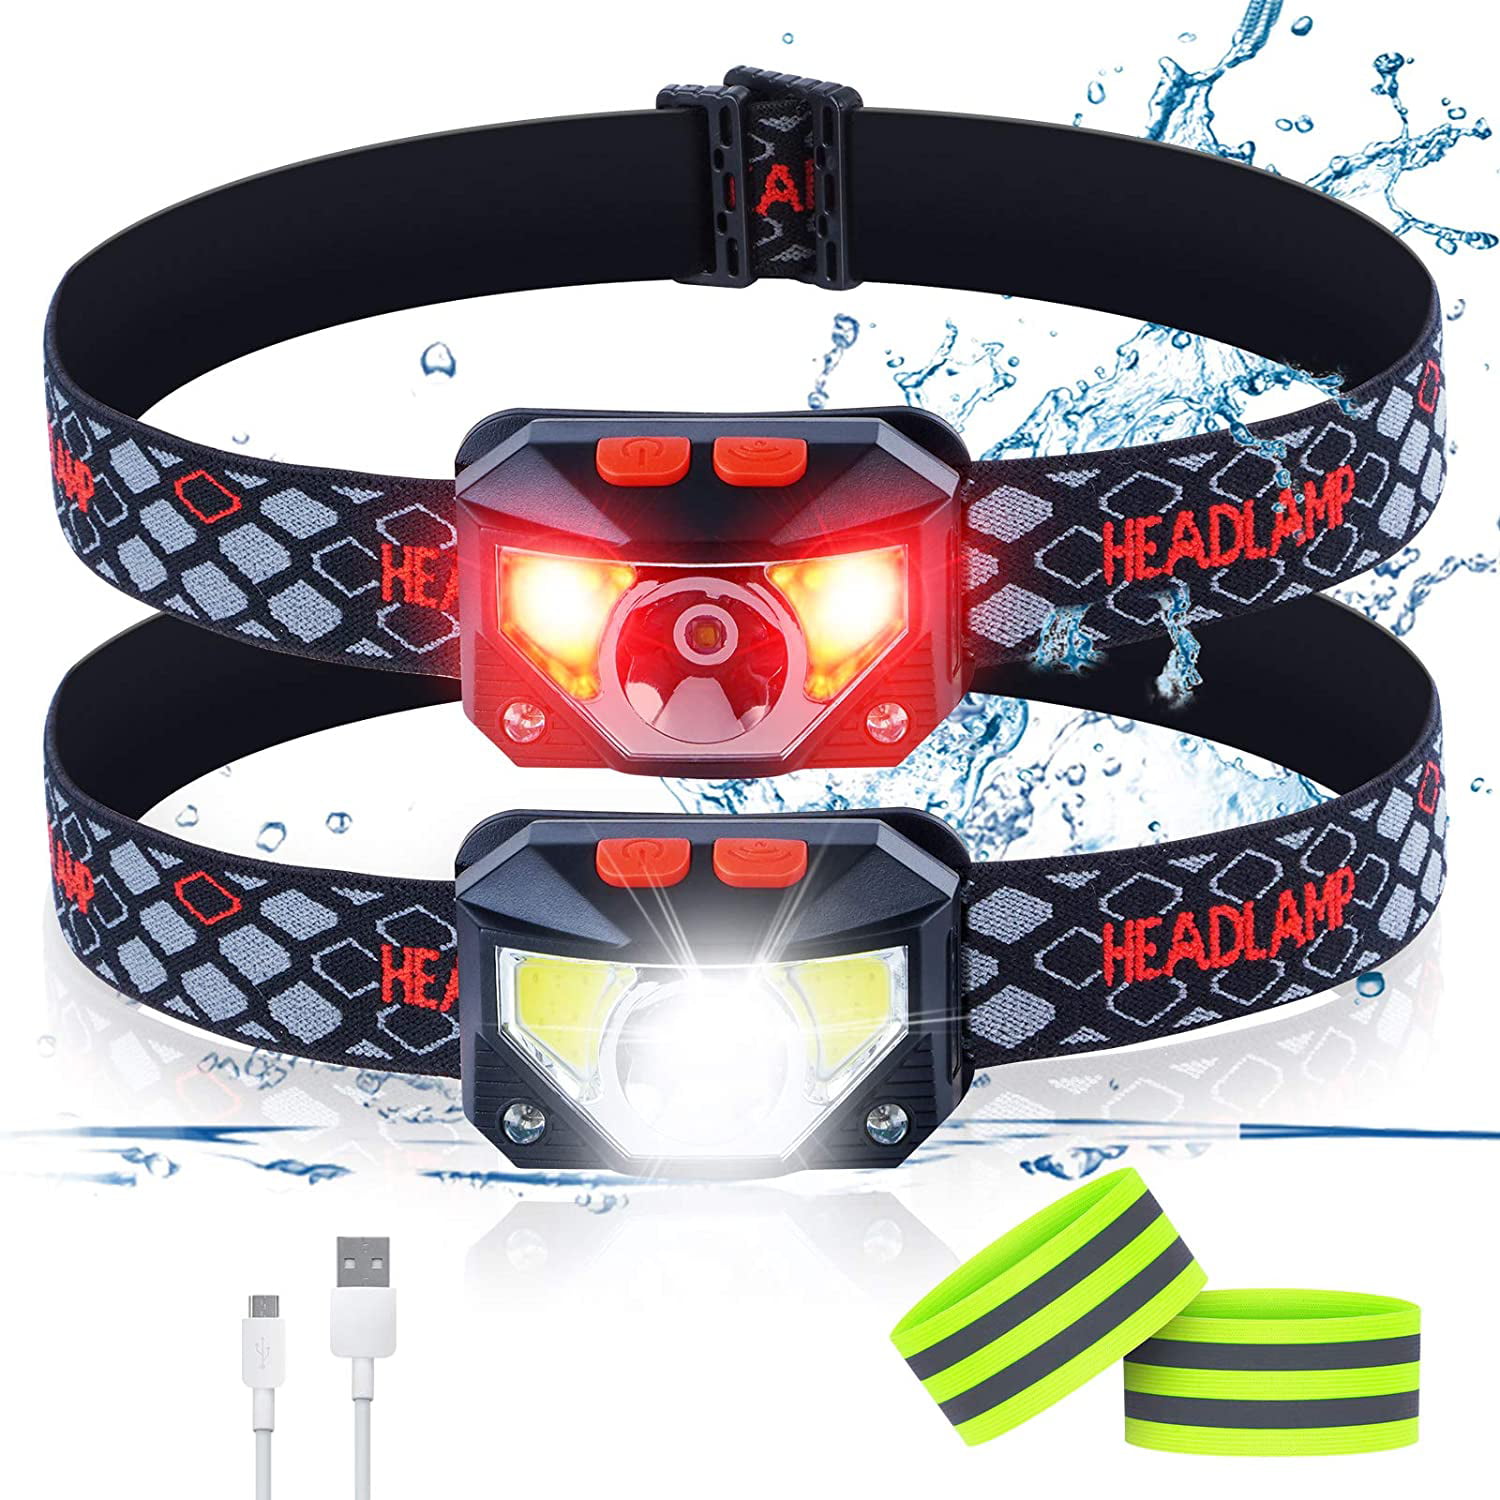 Headlamp Flashlight IPX5 Waterproof Motion Sensor Head Lamp 1100 Lumen Ultra-Light Bright LED Rechargeable Headlight with White Red Light 8 Modes for Outdoor Camping Cycling Running Fishing-2pack 